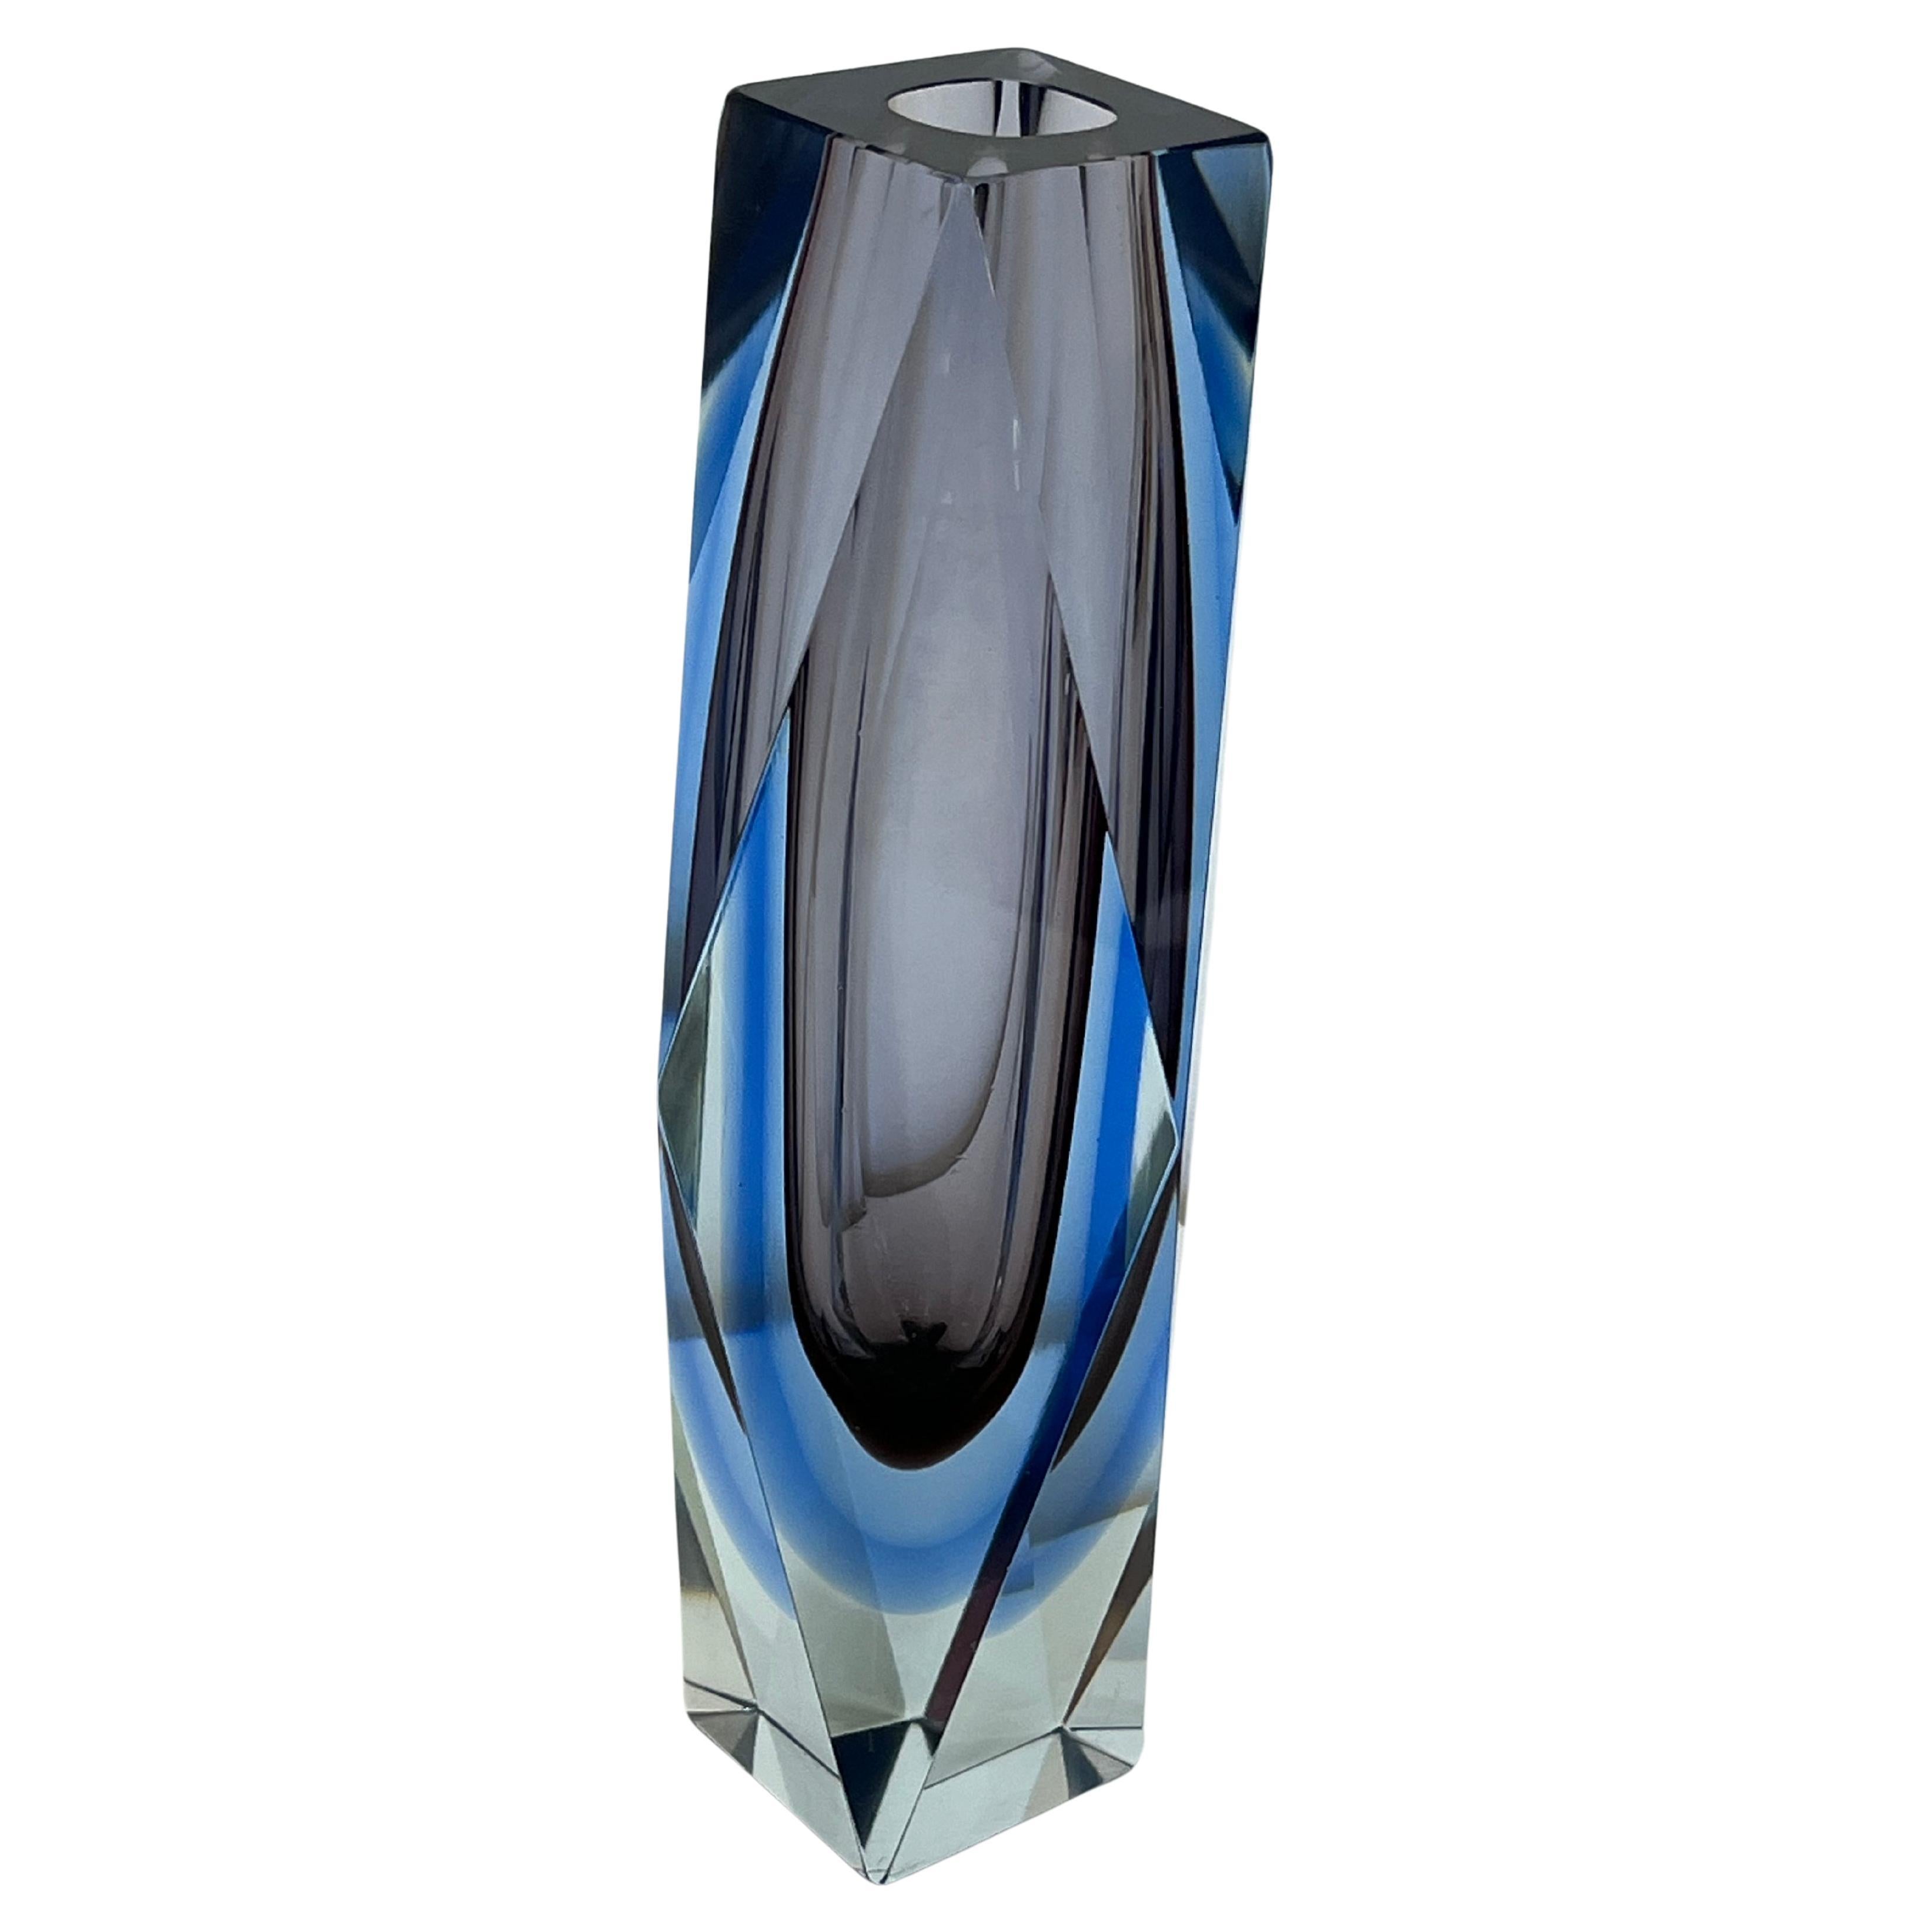 Mid-Century Venetian Murano Glass Vase 1960s
Purchased in Venice, in one of the most prestigious shops in Piazza San Marco.
Height 30 cm.
Intact with small signs of aging. Good conditions.